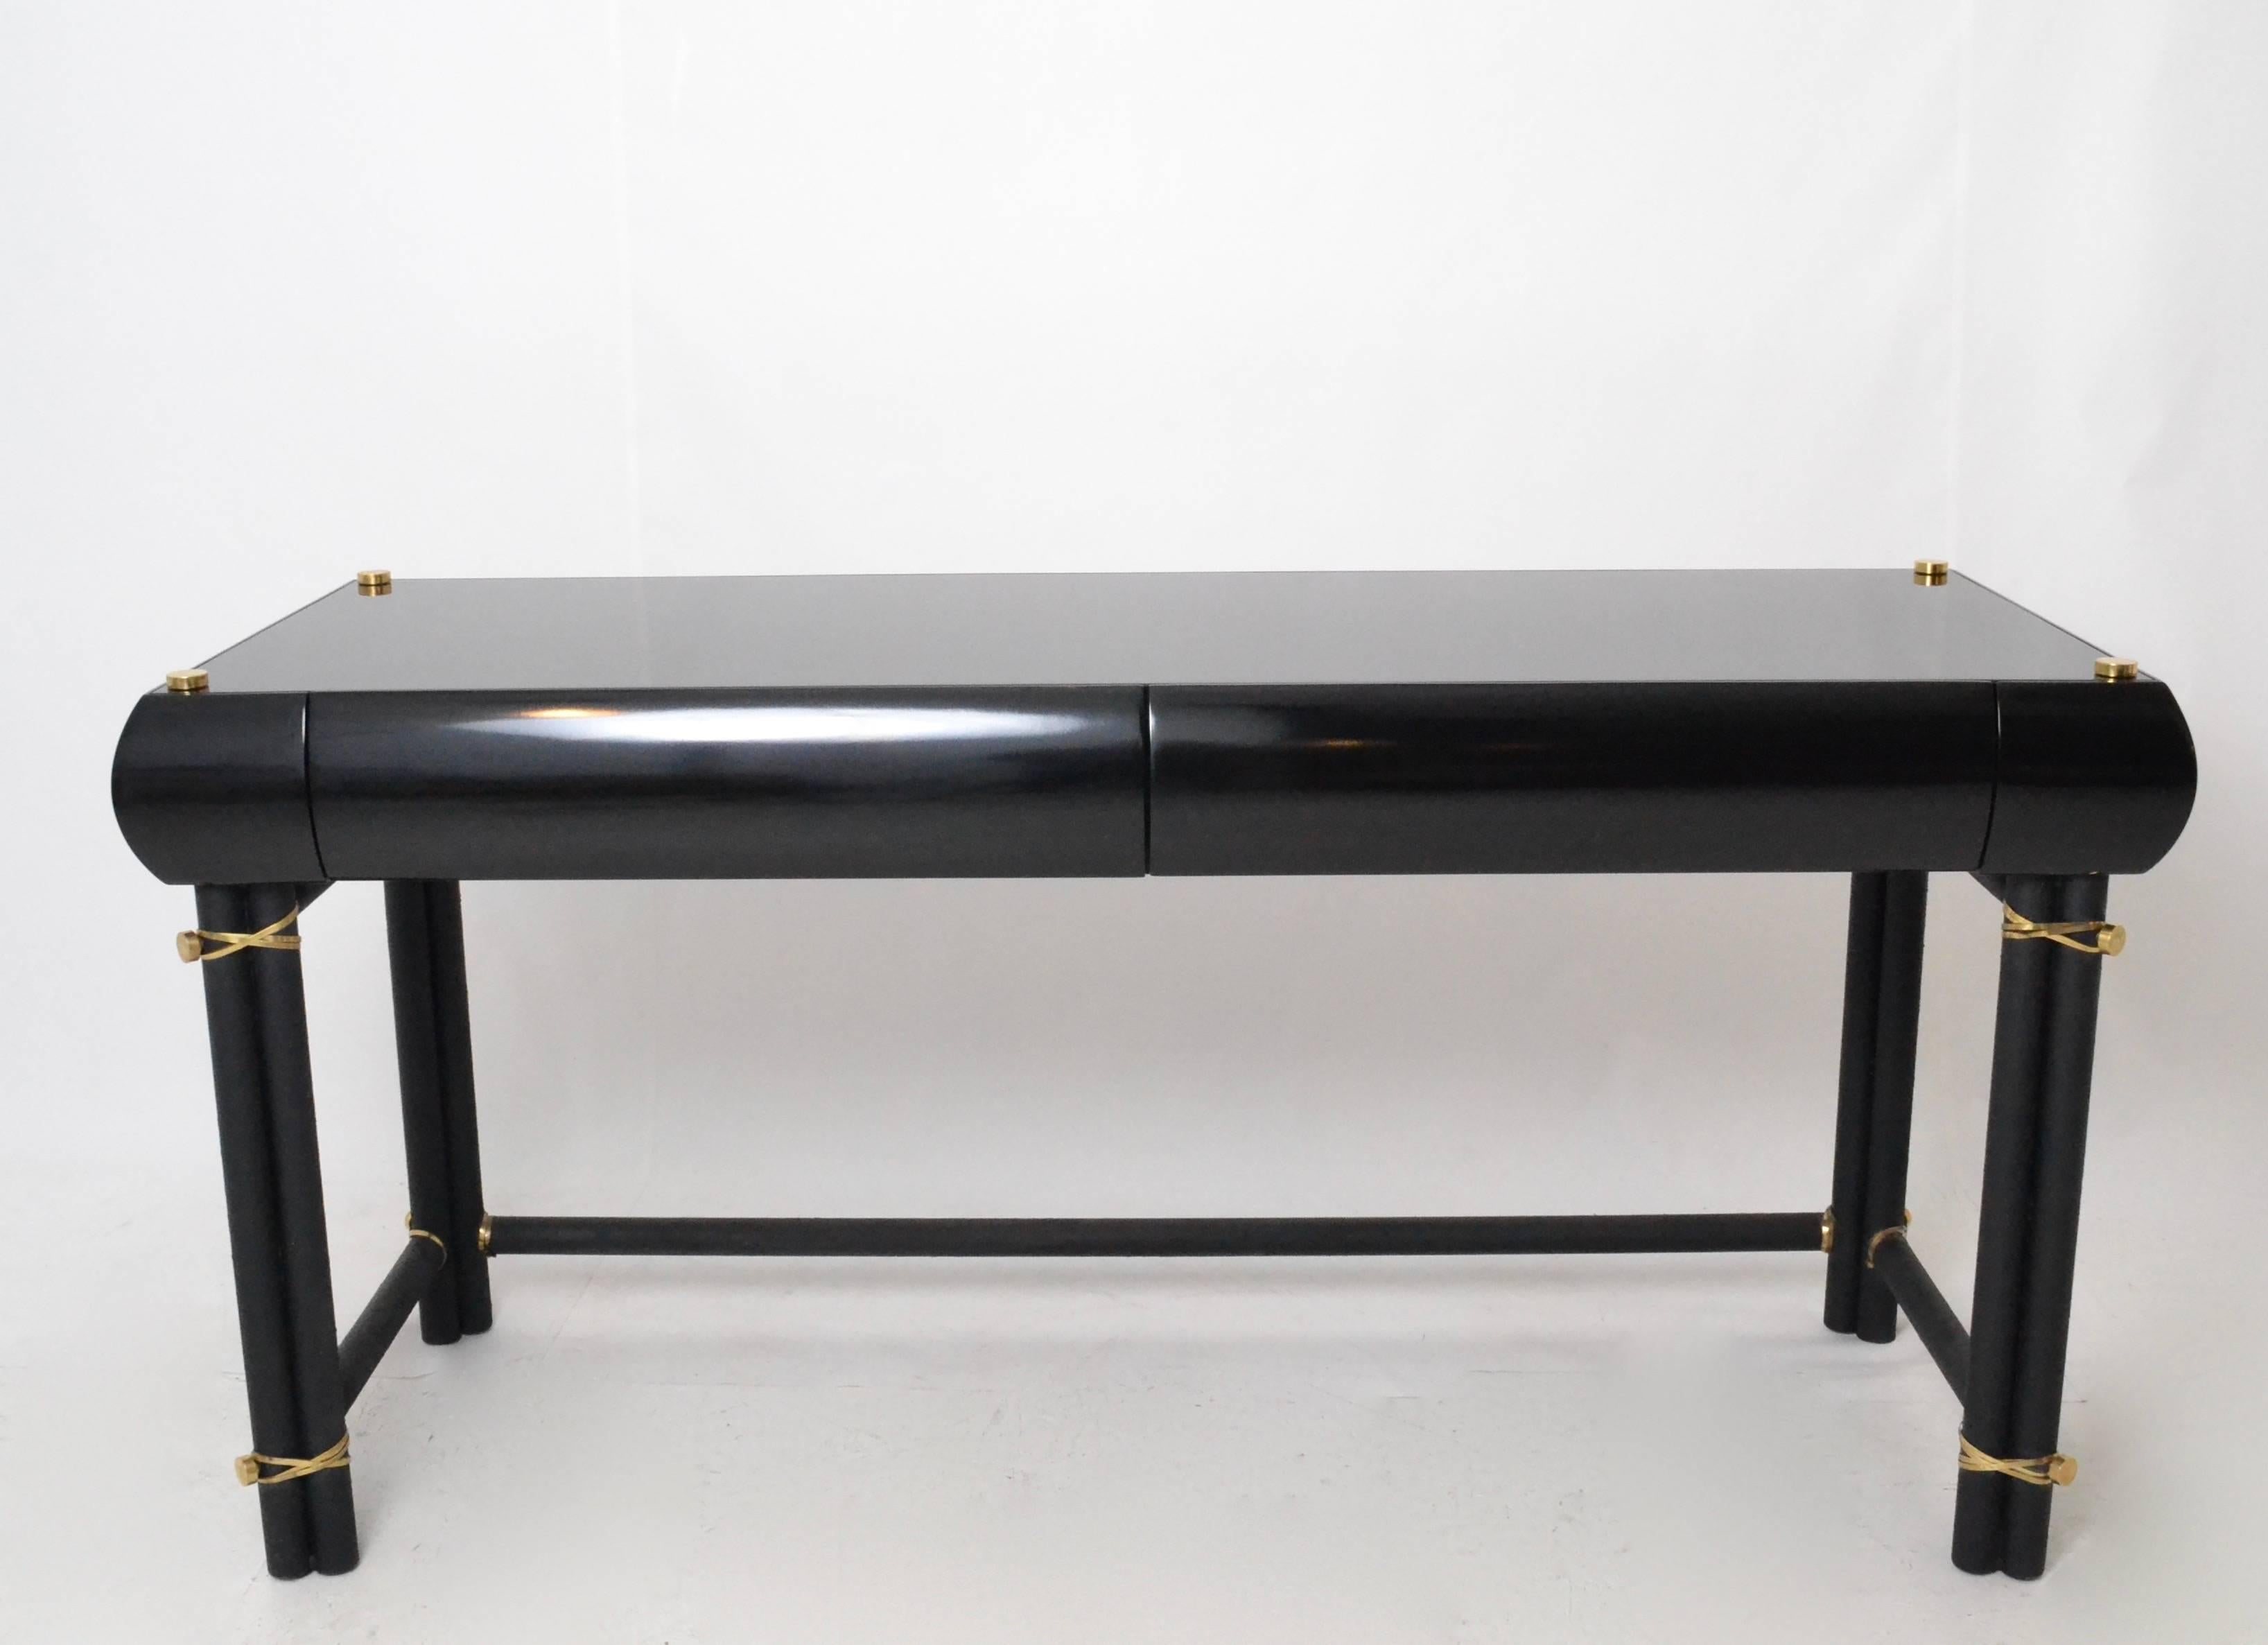 Quality desk with metal legs powder coated in textured black and a gloss lacquered wood top. Nice solid brass details on top and legs. Two drawers.